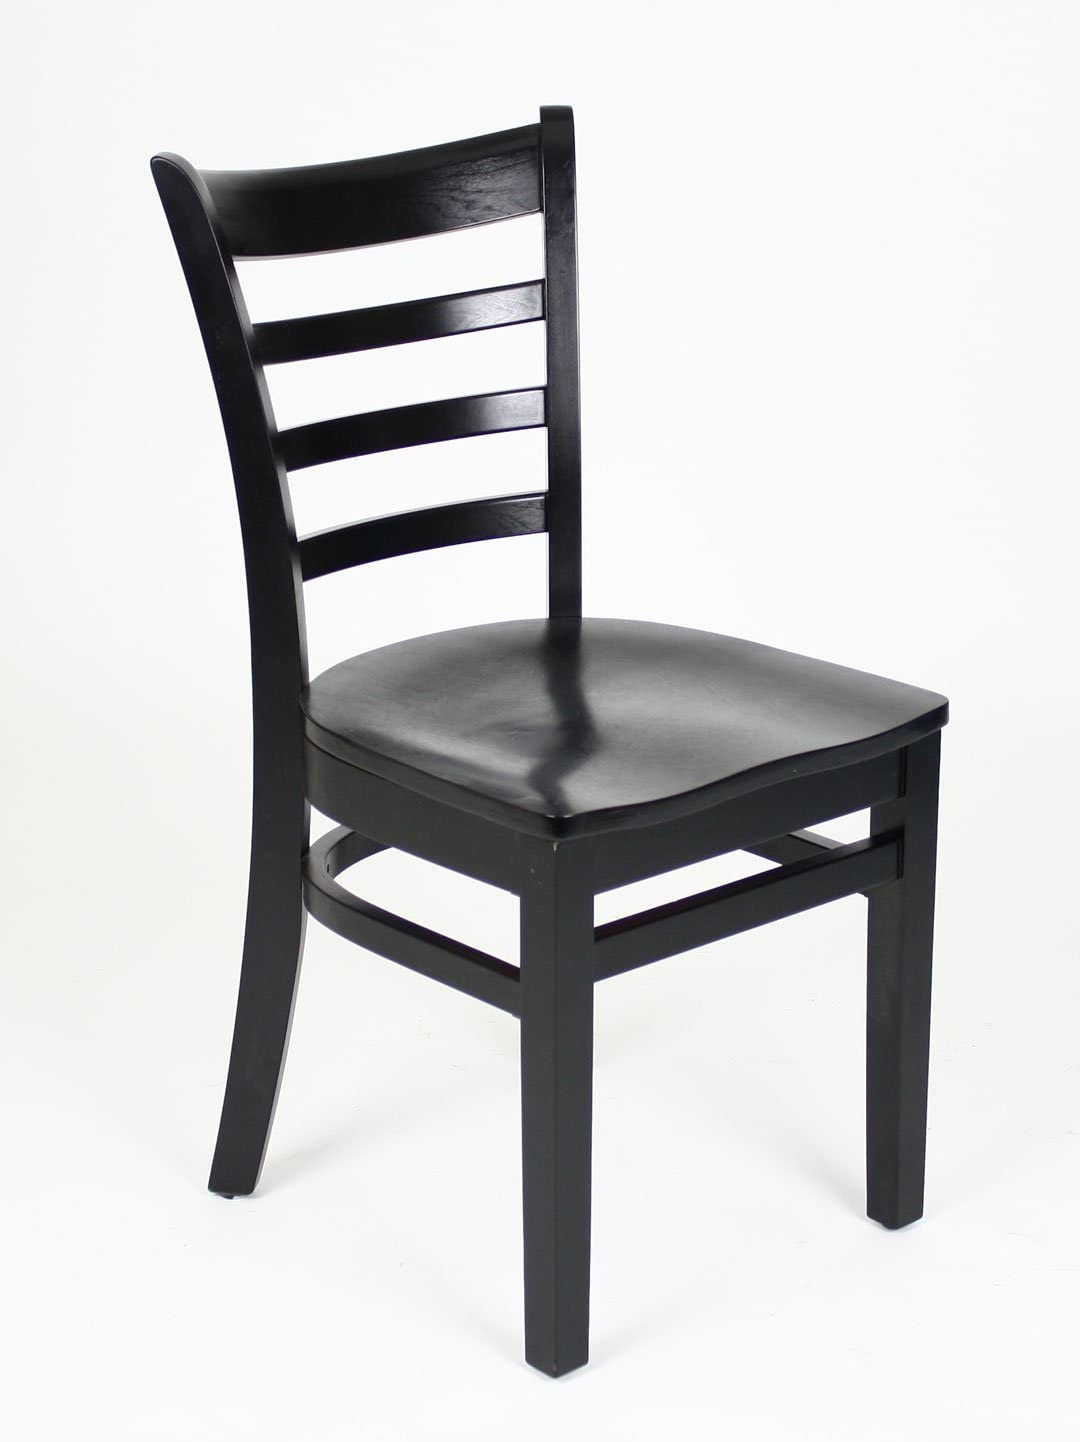 Ladder Back Style Dining Chair - Black Stain